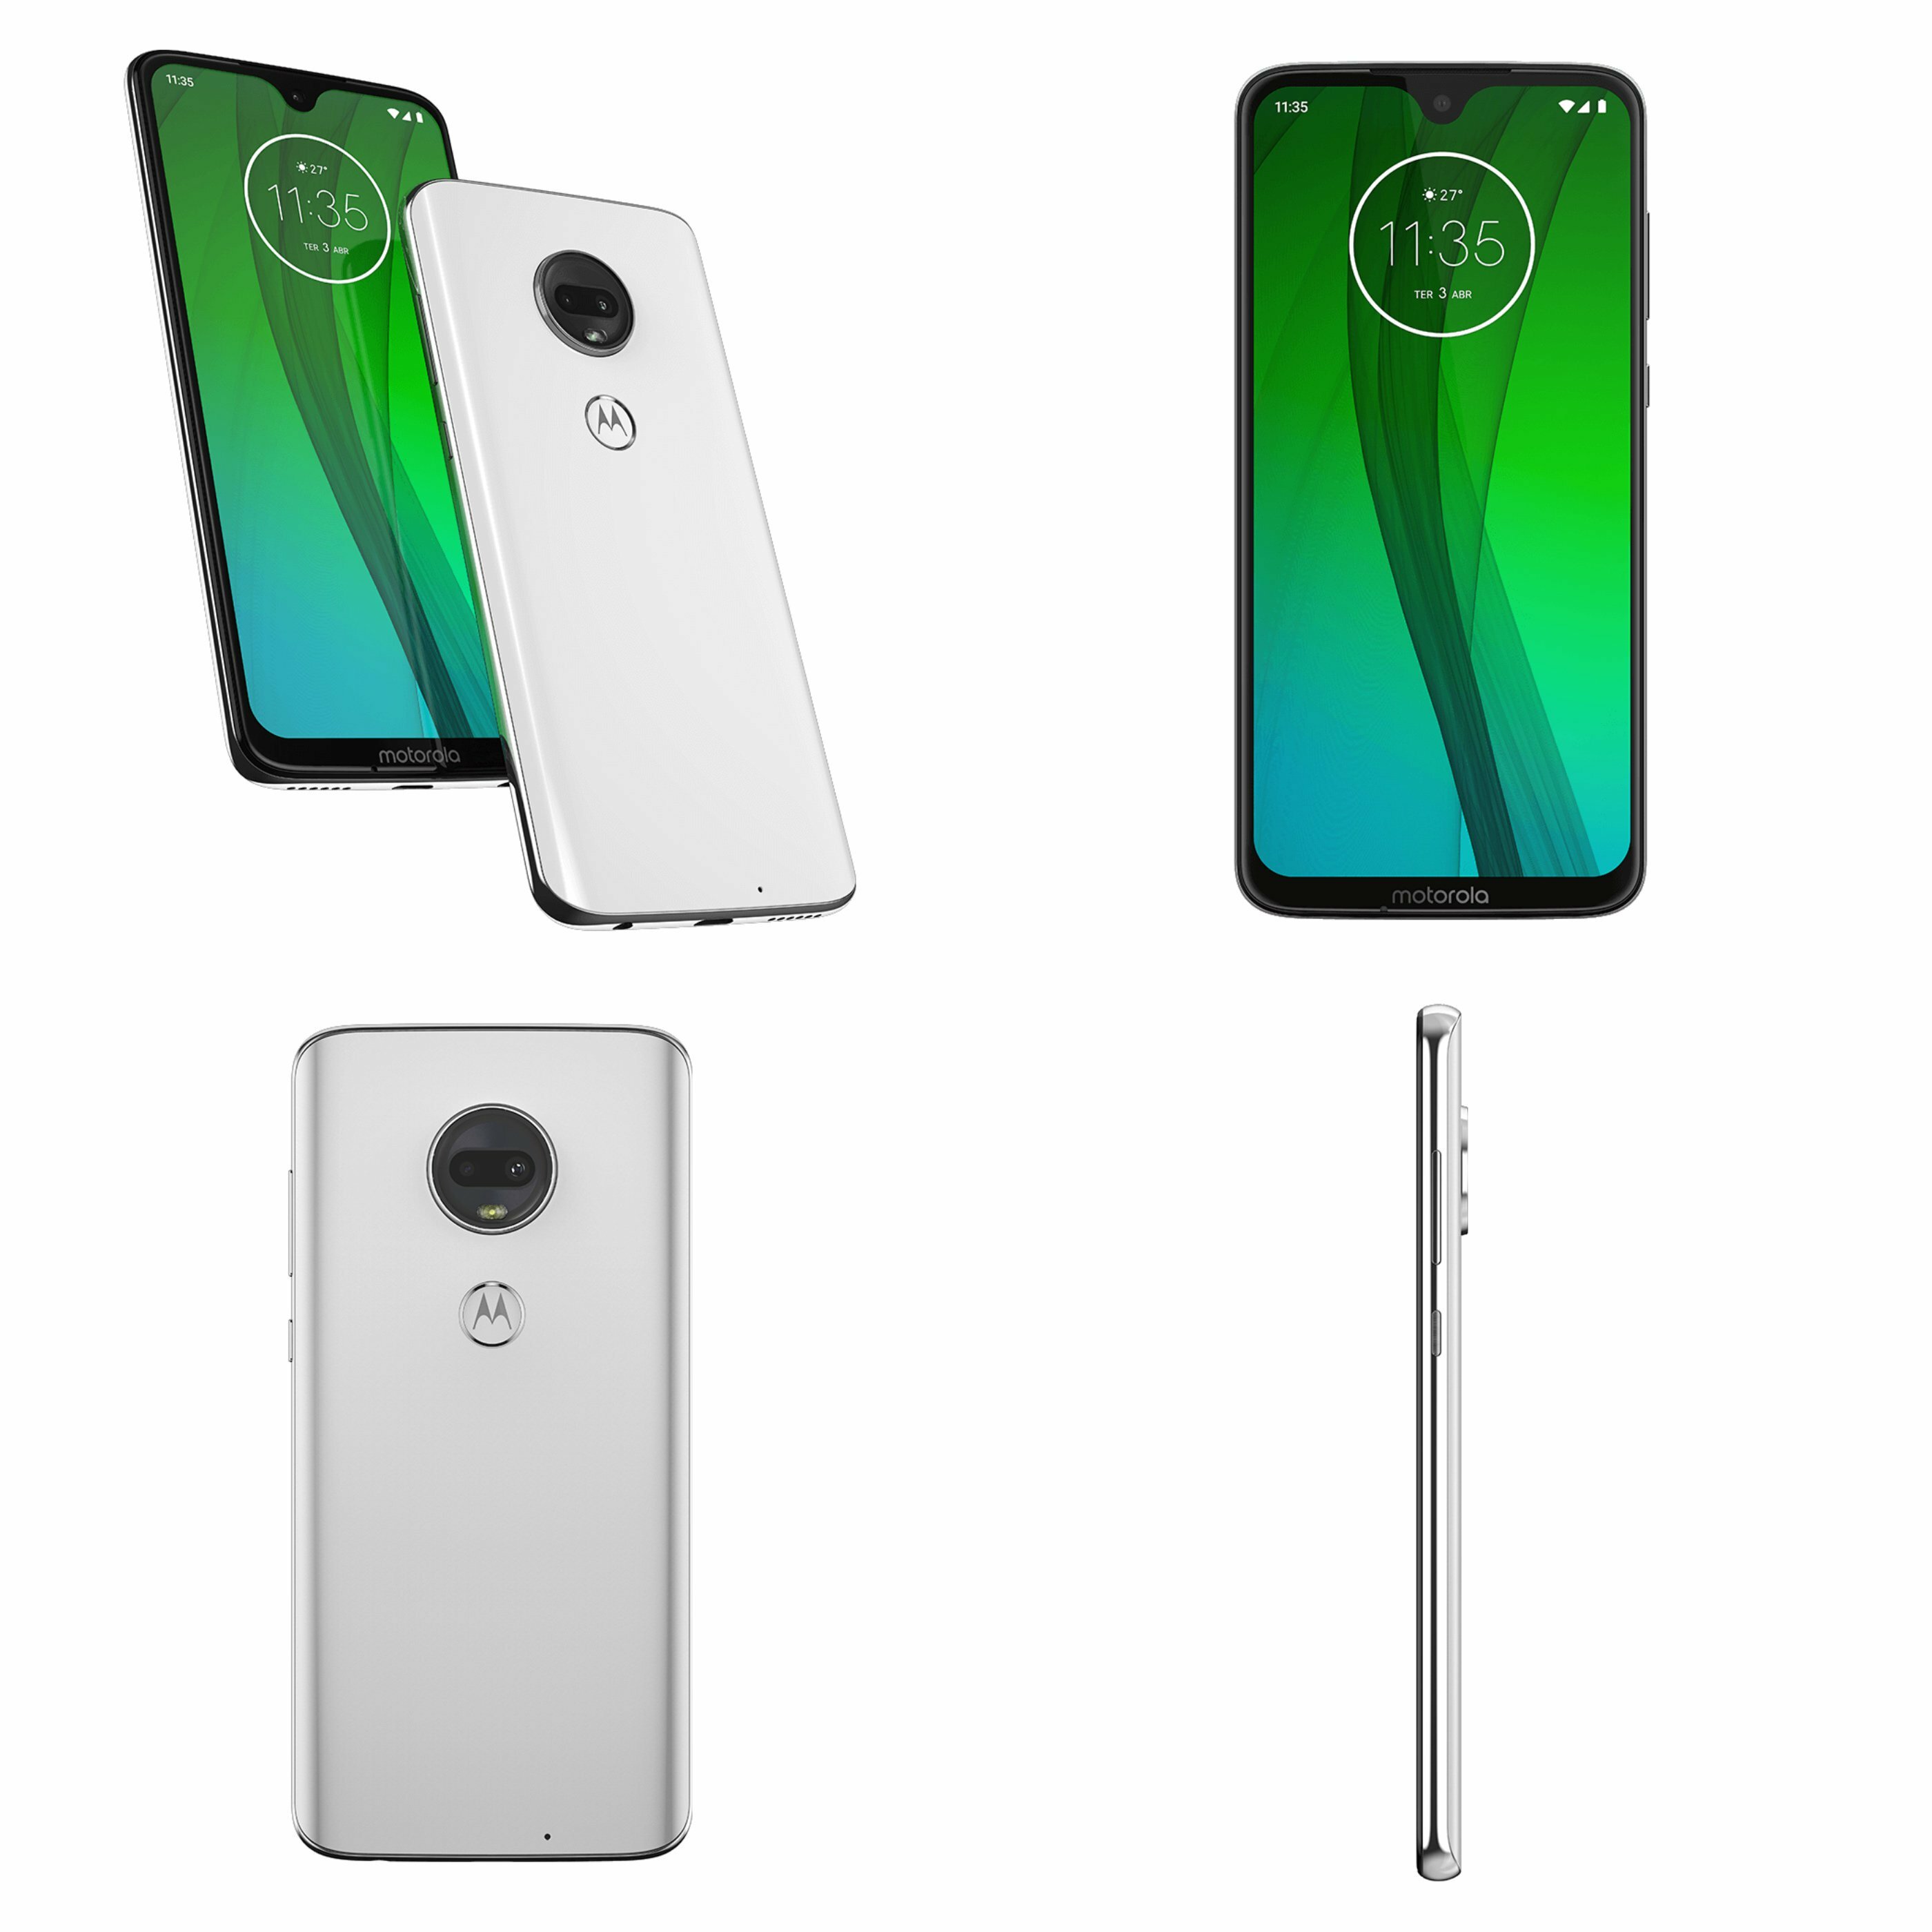 What kind of cameras will the Motorola Moto G7 have?